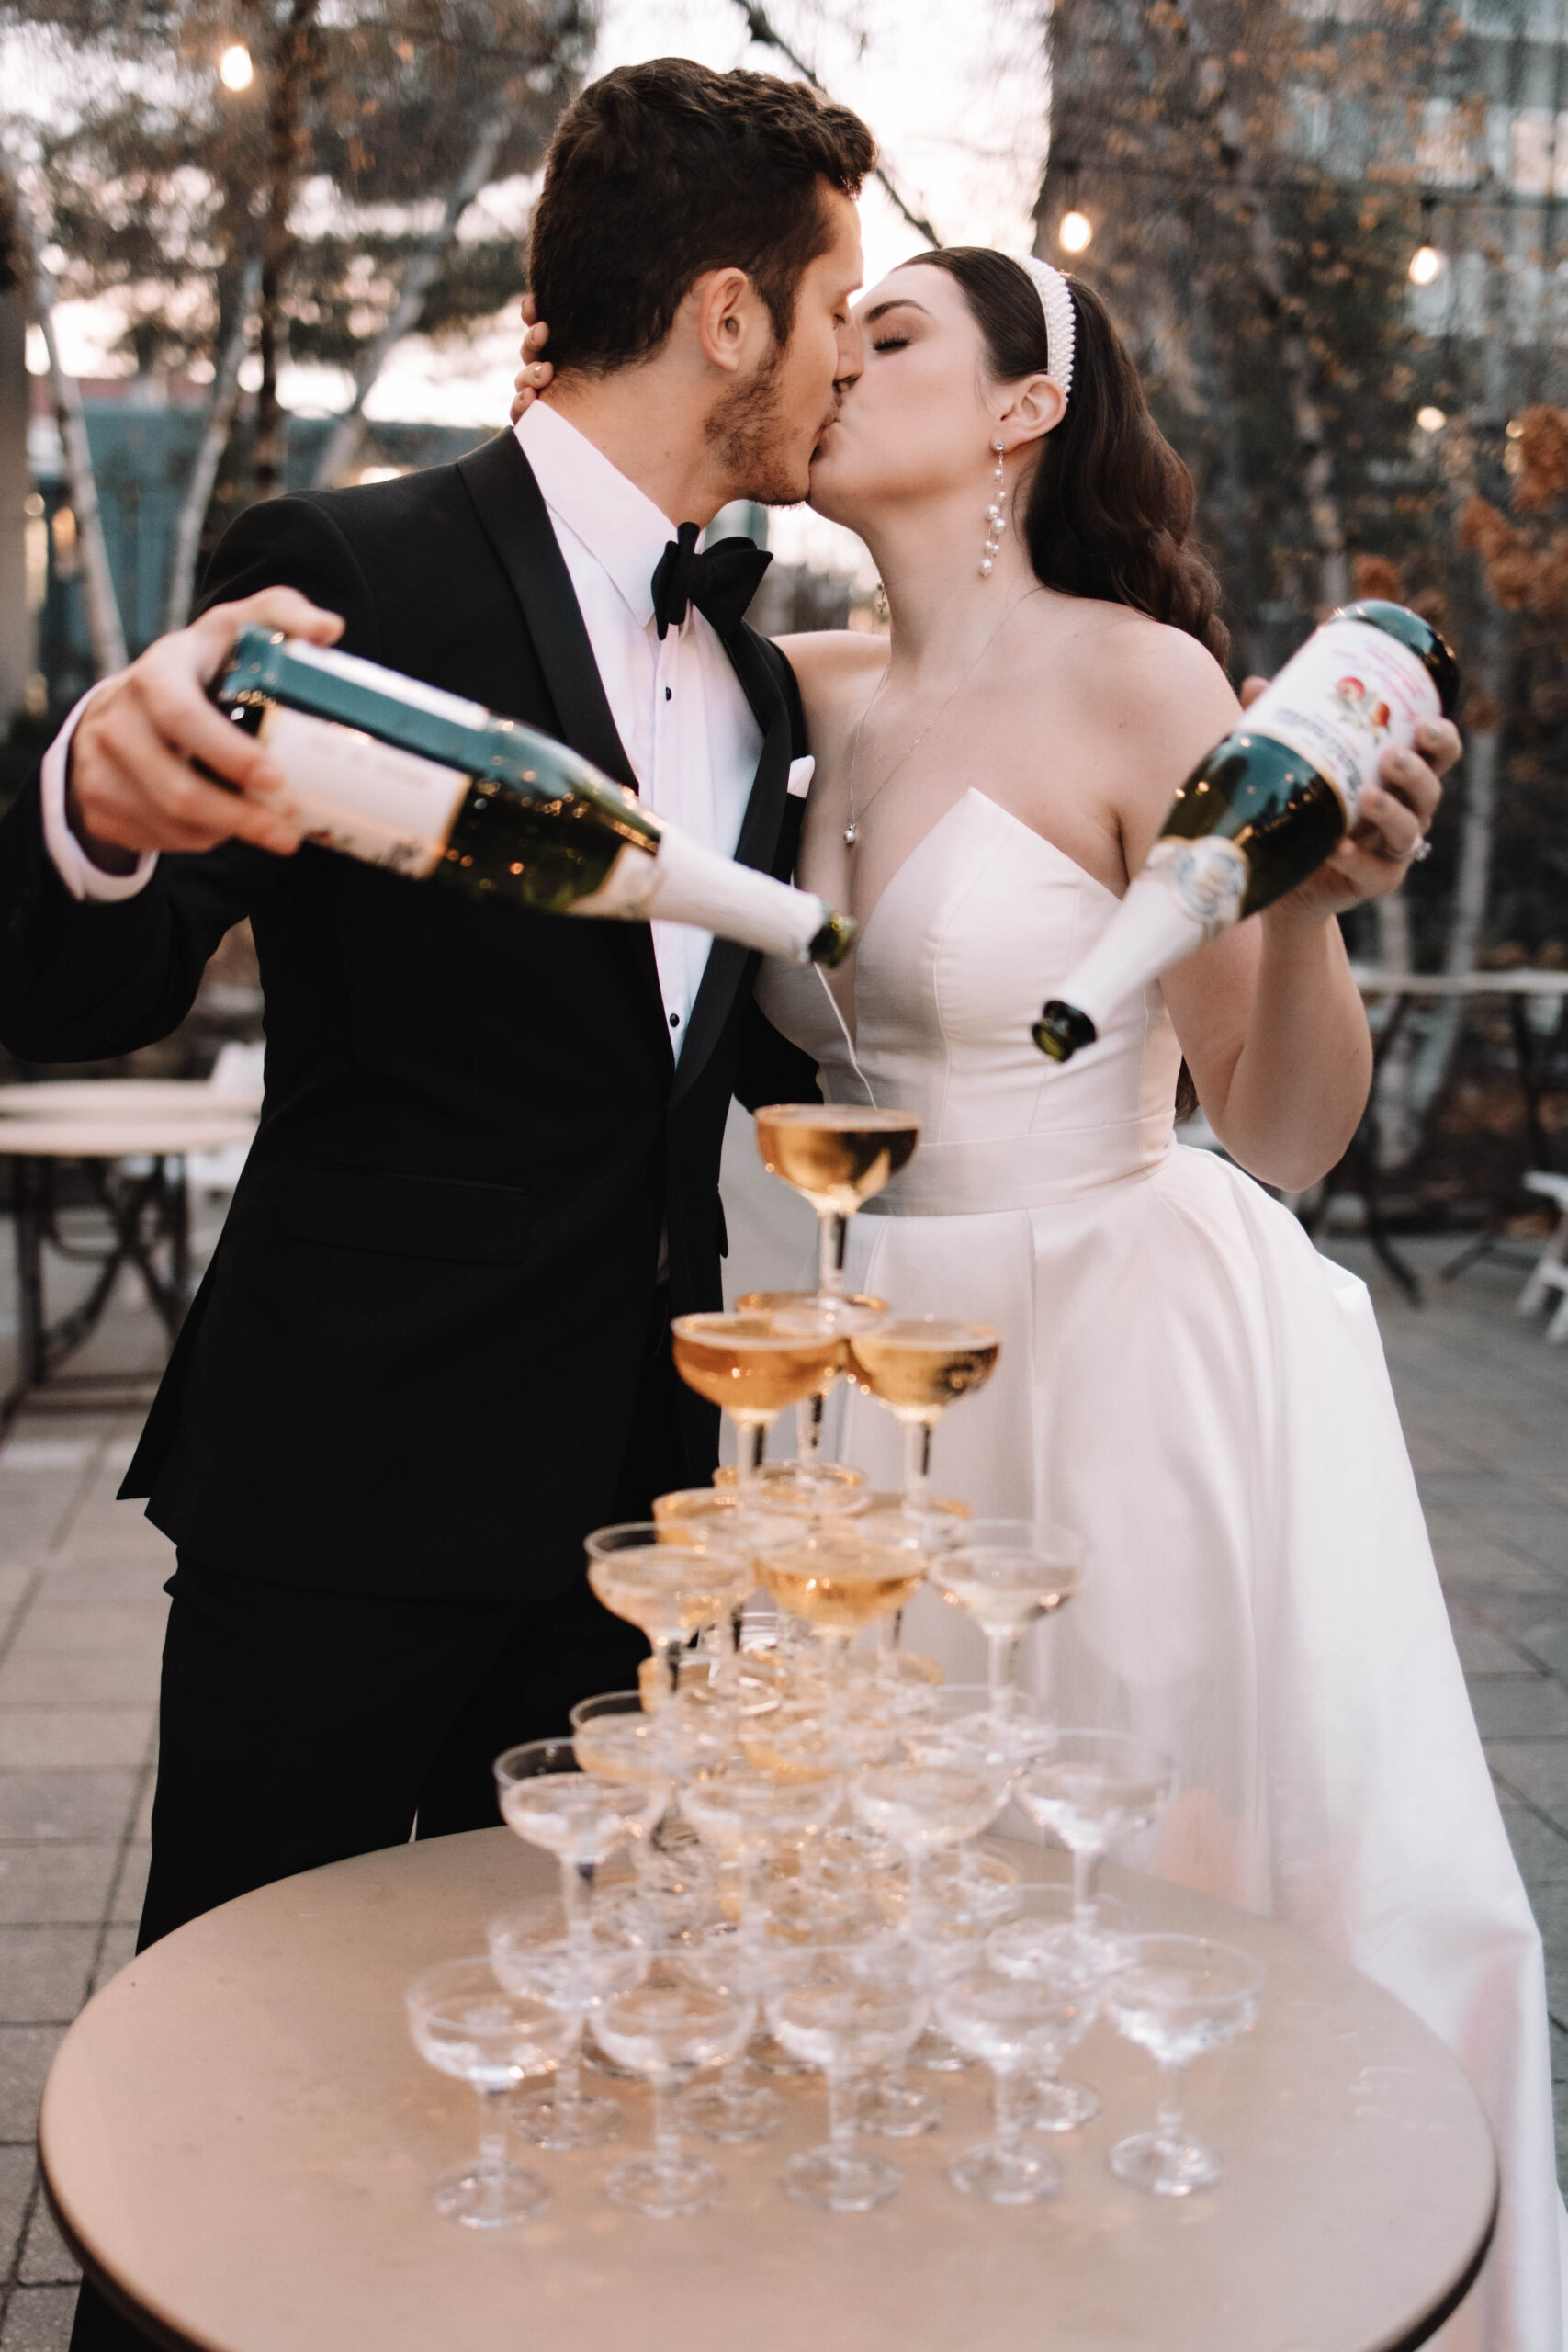 A bride and groom kiss while pouring champagne into a tower of glasses at an outdoor celebration at a wedding in Minnesota